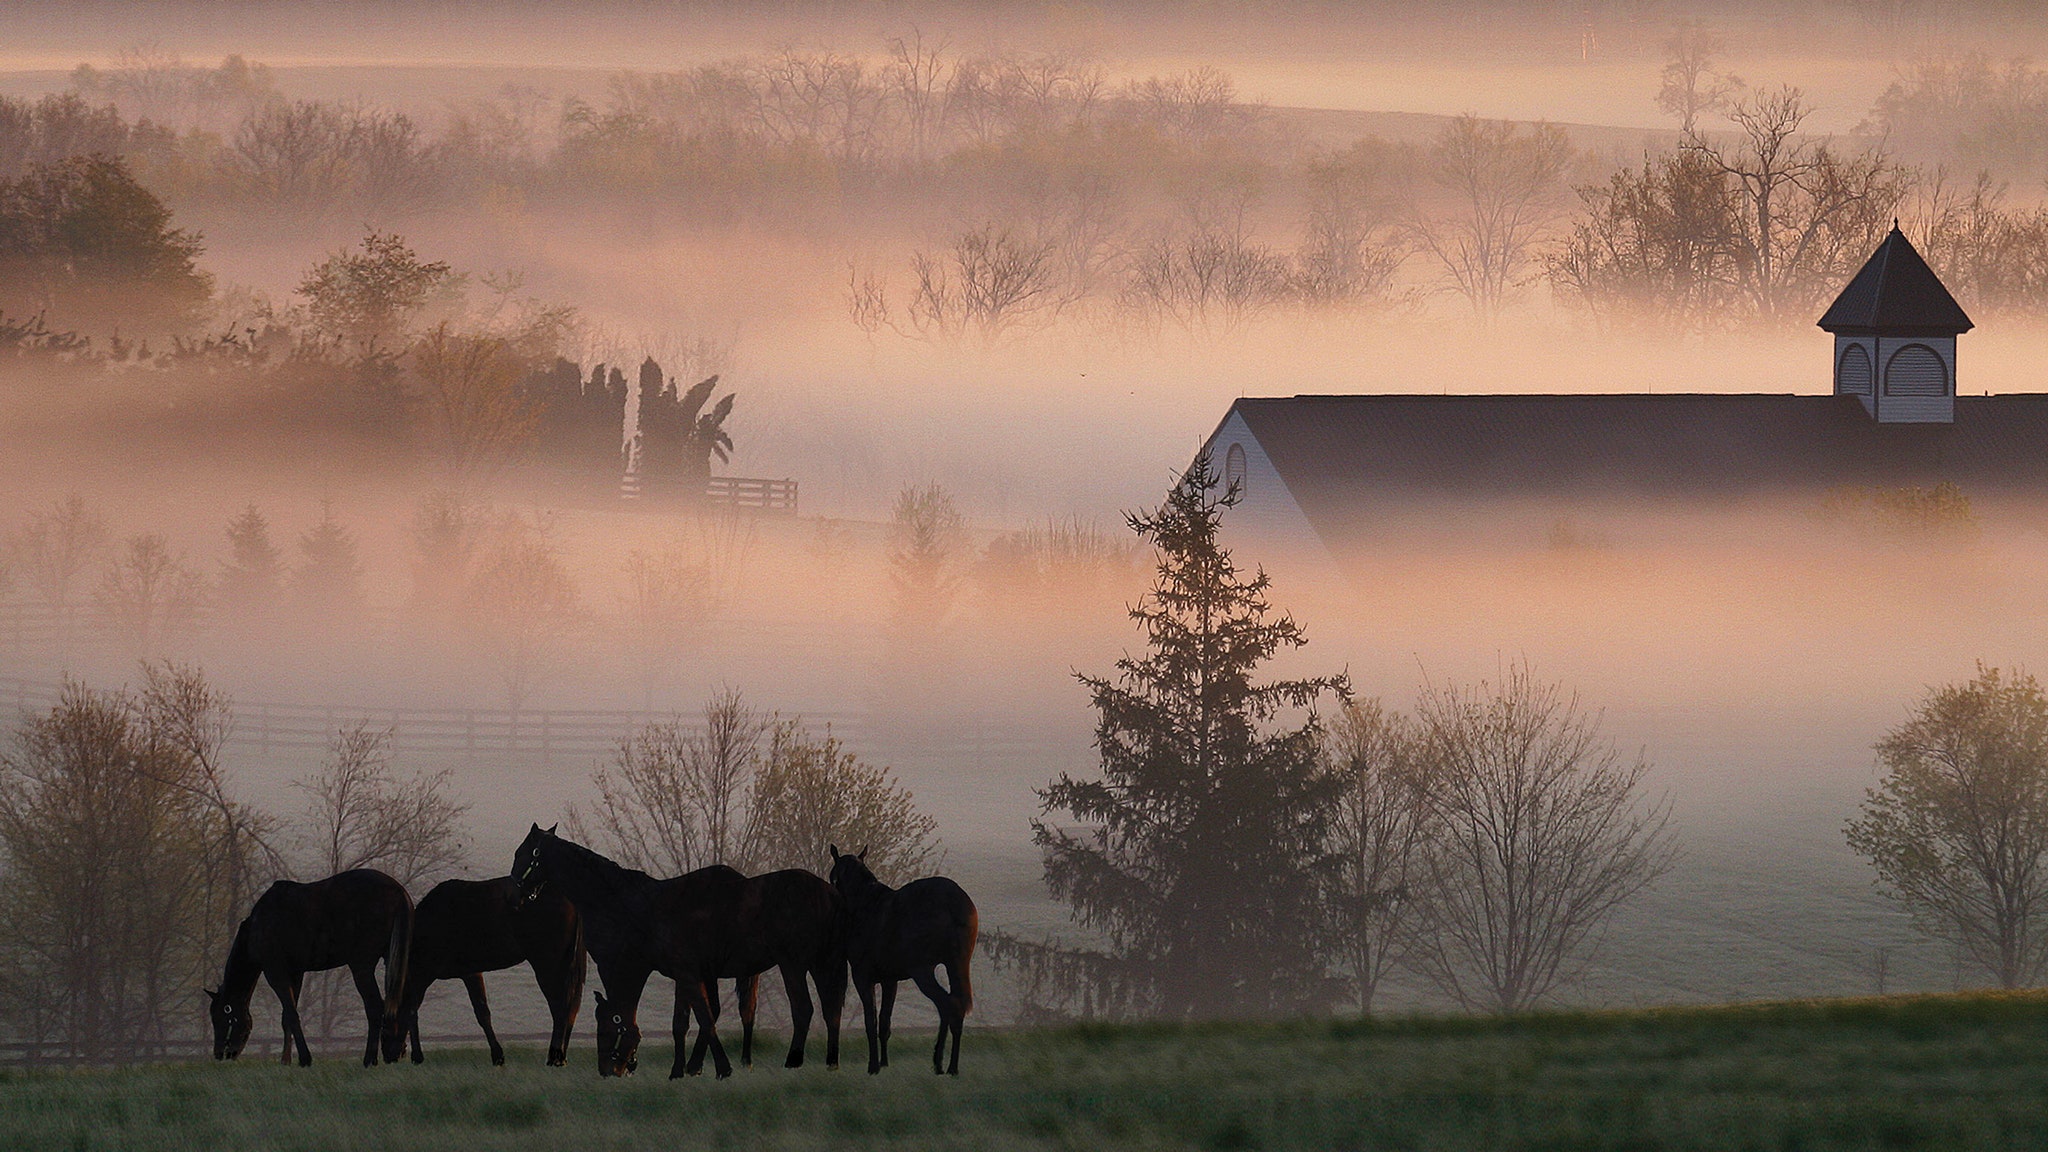 You Can Now Visit The Farms Of The World's Most Famous Horses. Condé Nast Traveler